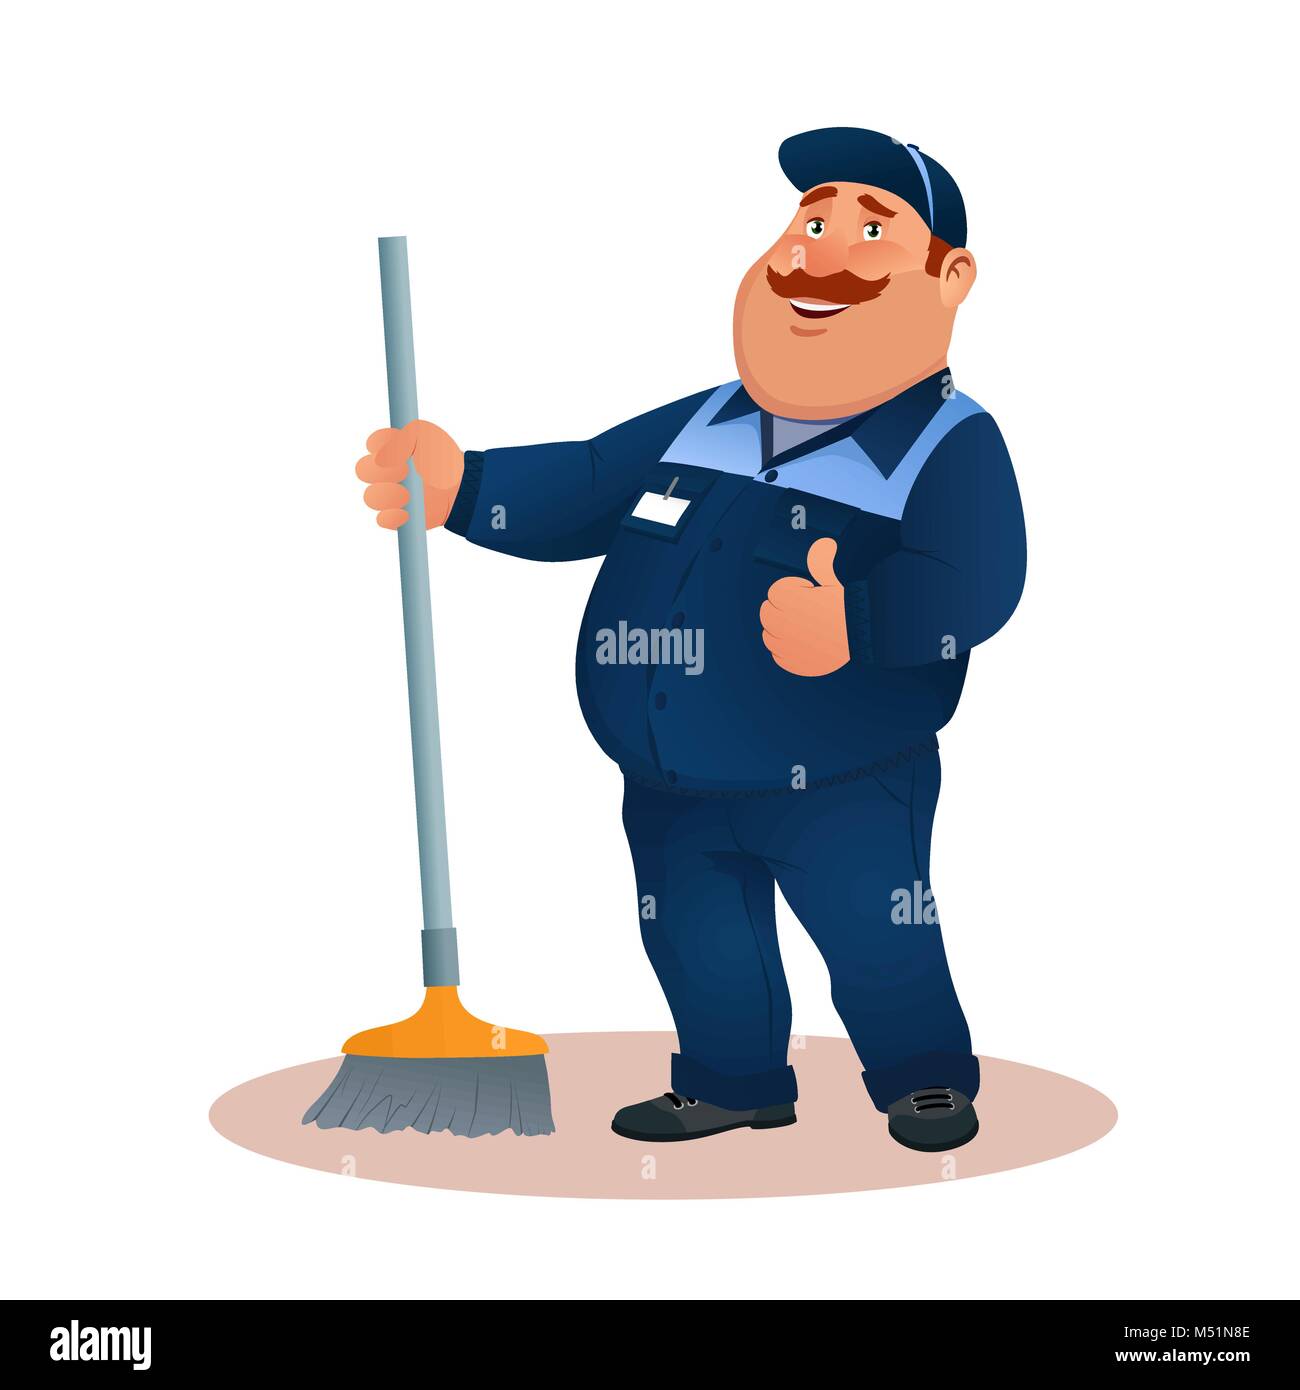 Funny cartoon janitor with mop and ok gesture. Smiling fat character in blue suit with broom. Happy flat cleaner in uniform from janitorial service or office cleaning. Colorful vector illustration. Stock Vector